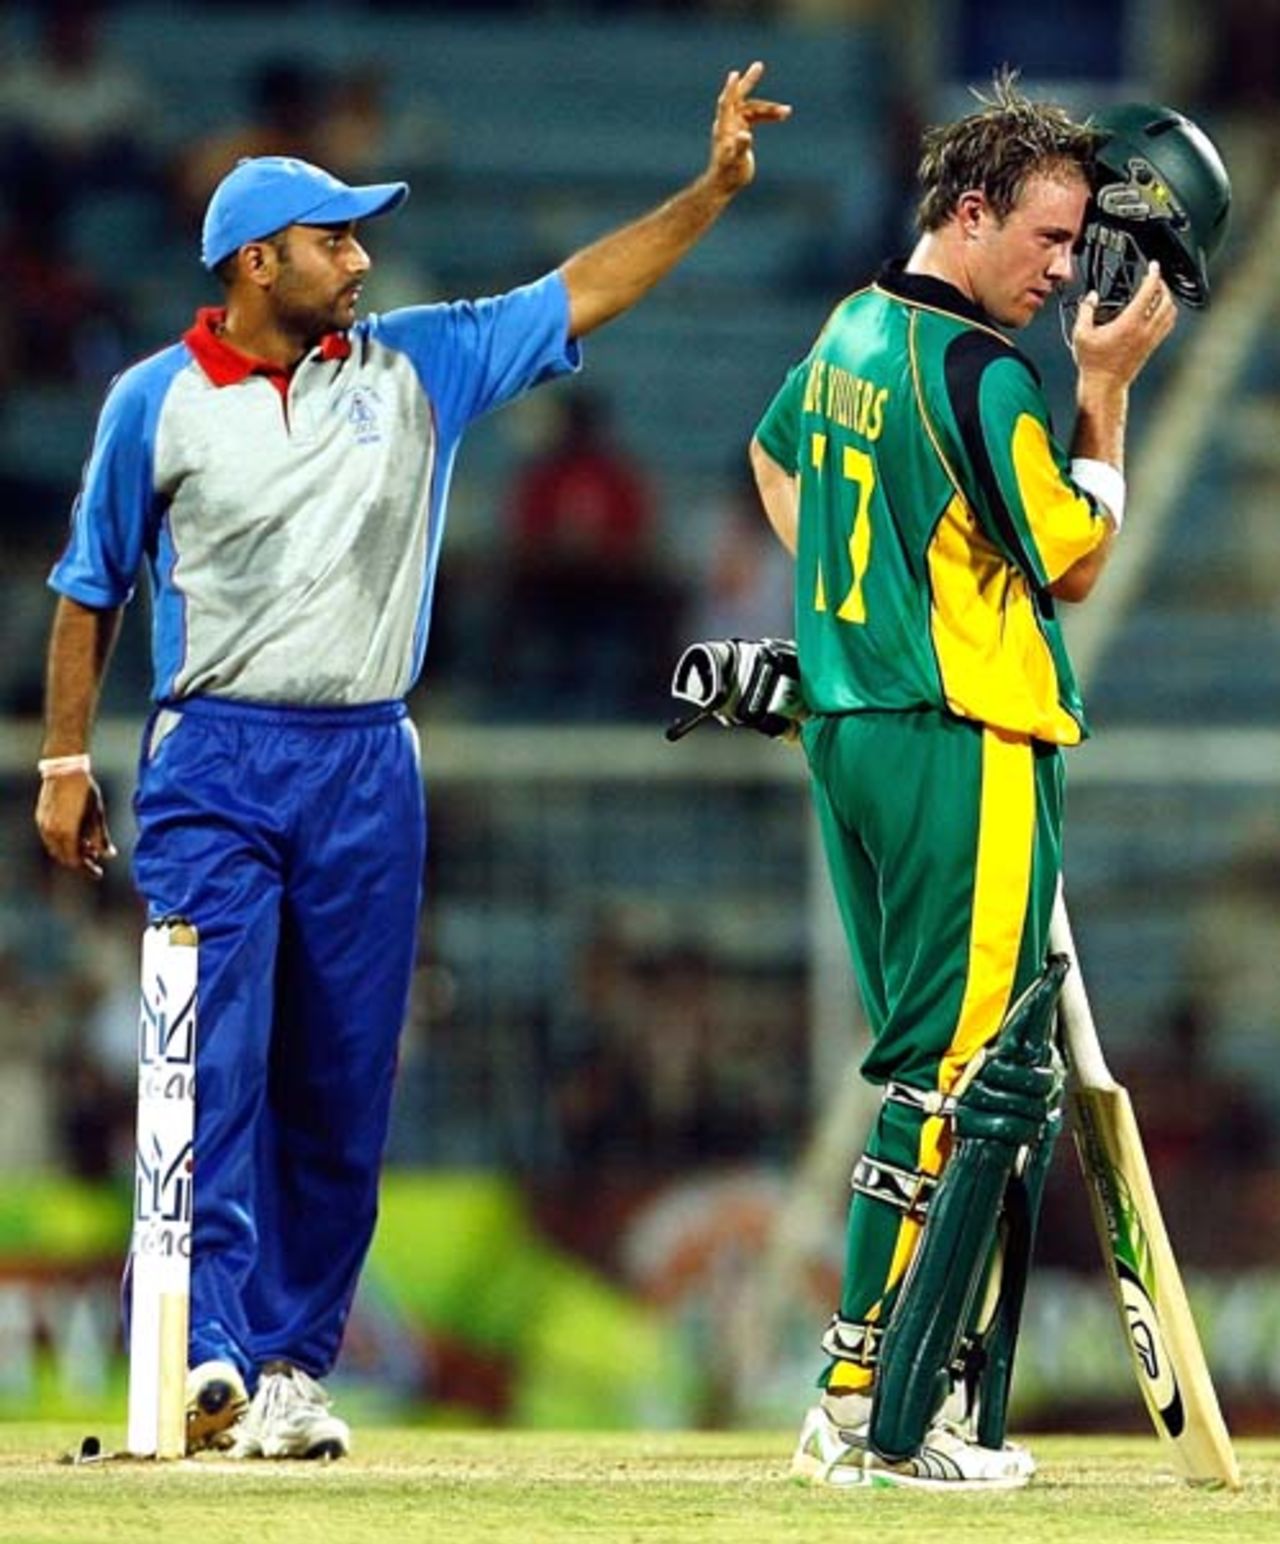 The acting skipper of Asia XI, Virender Sehwag makes a field change as  AB deVilliers looks on during the third ODI of the Afro-Asia Cup at Chennai, June 10, 2007 